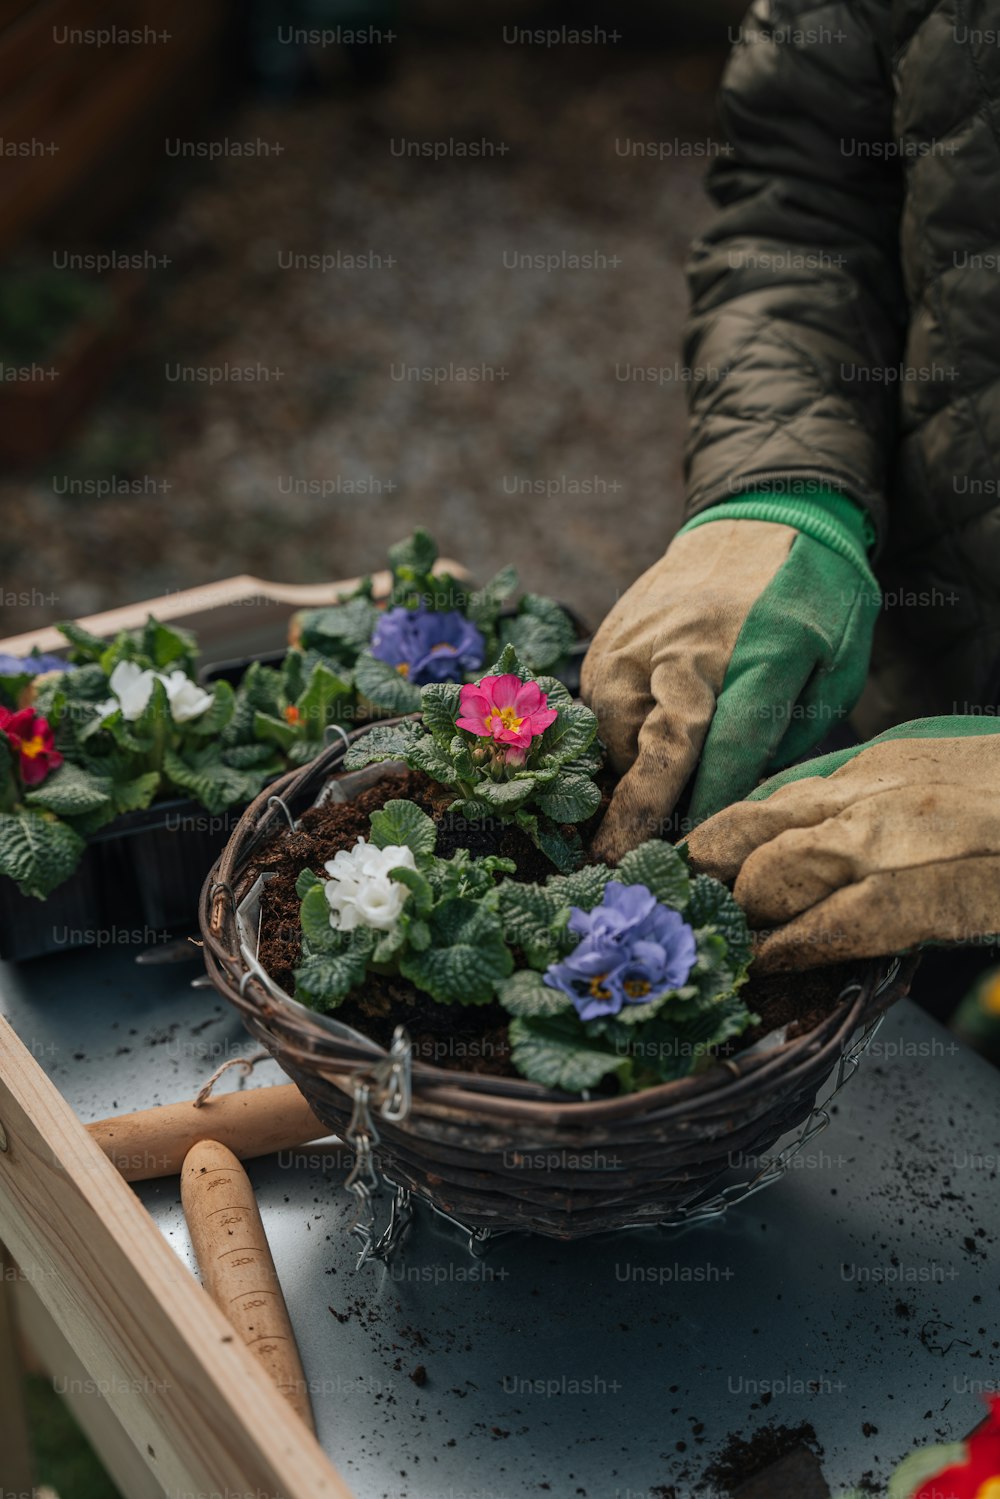 a person wearing gloves and gardening gloves is putting flowers in a basket